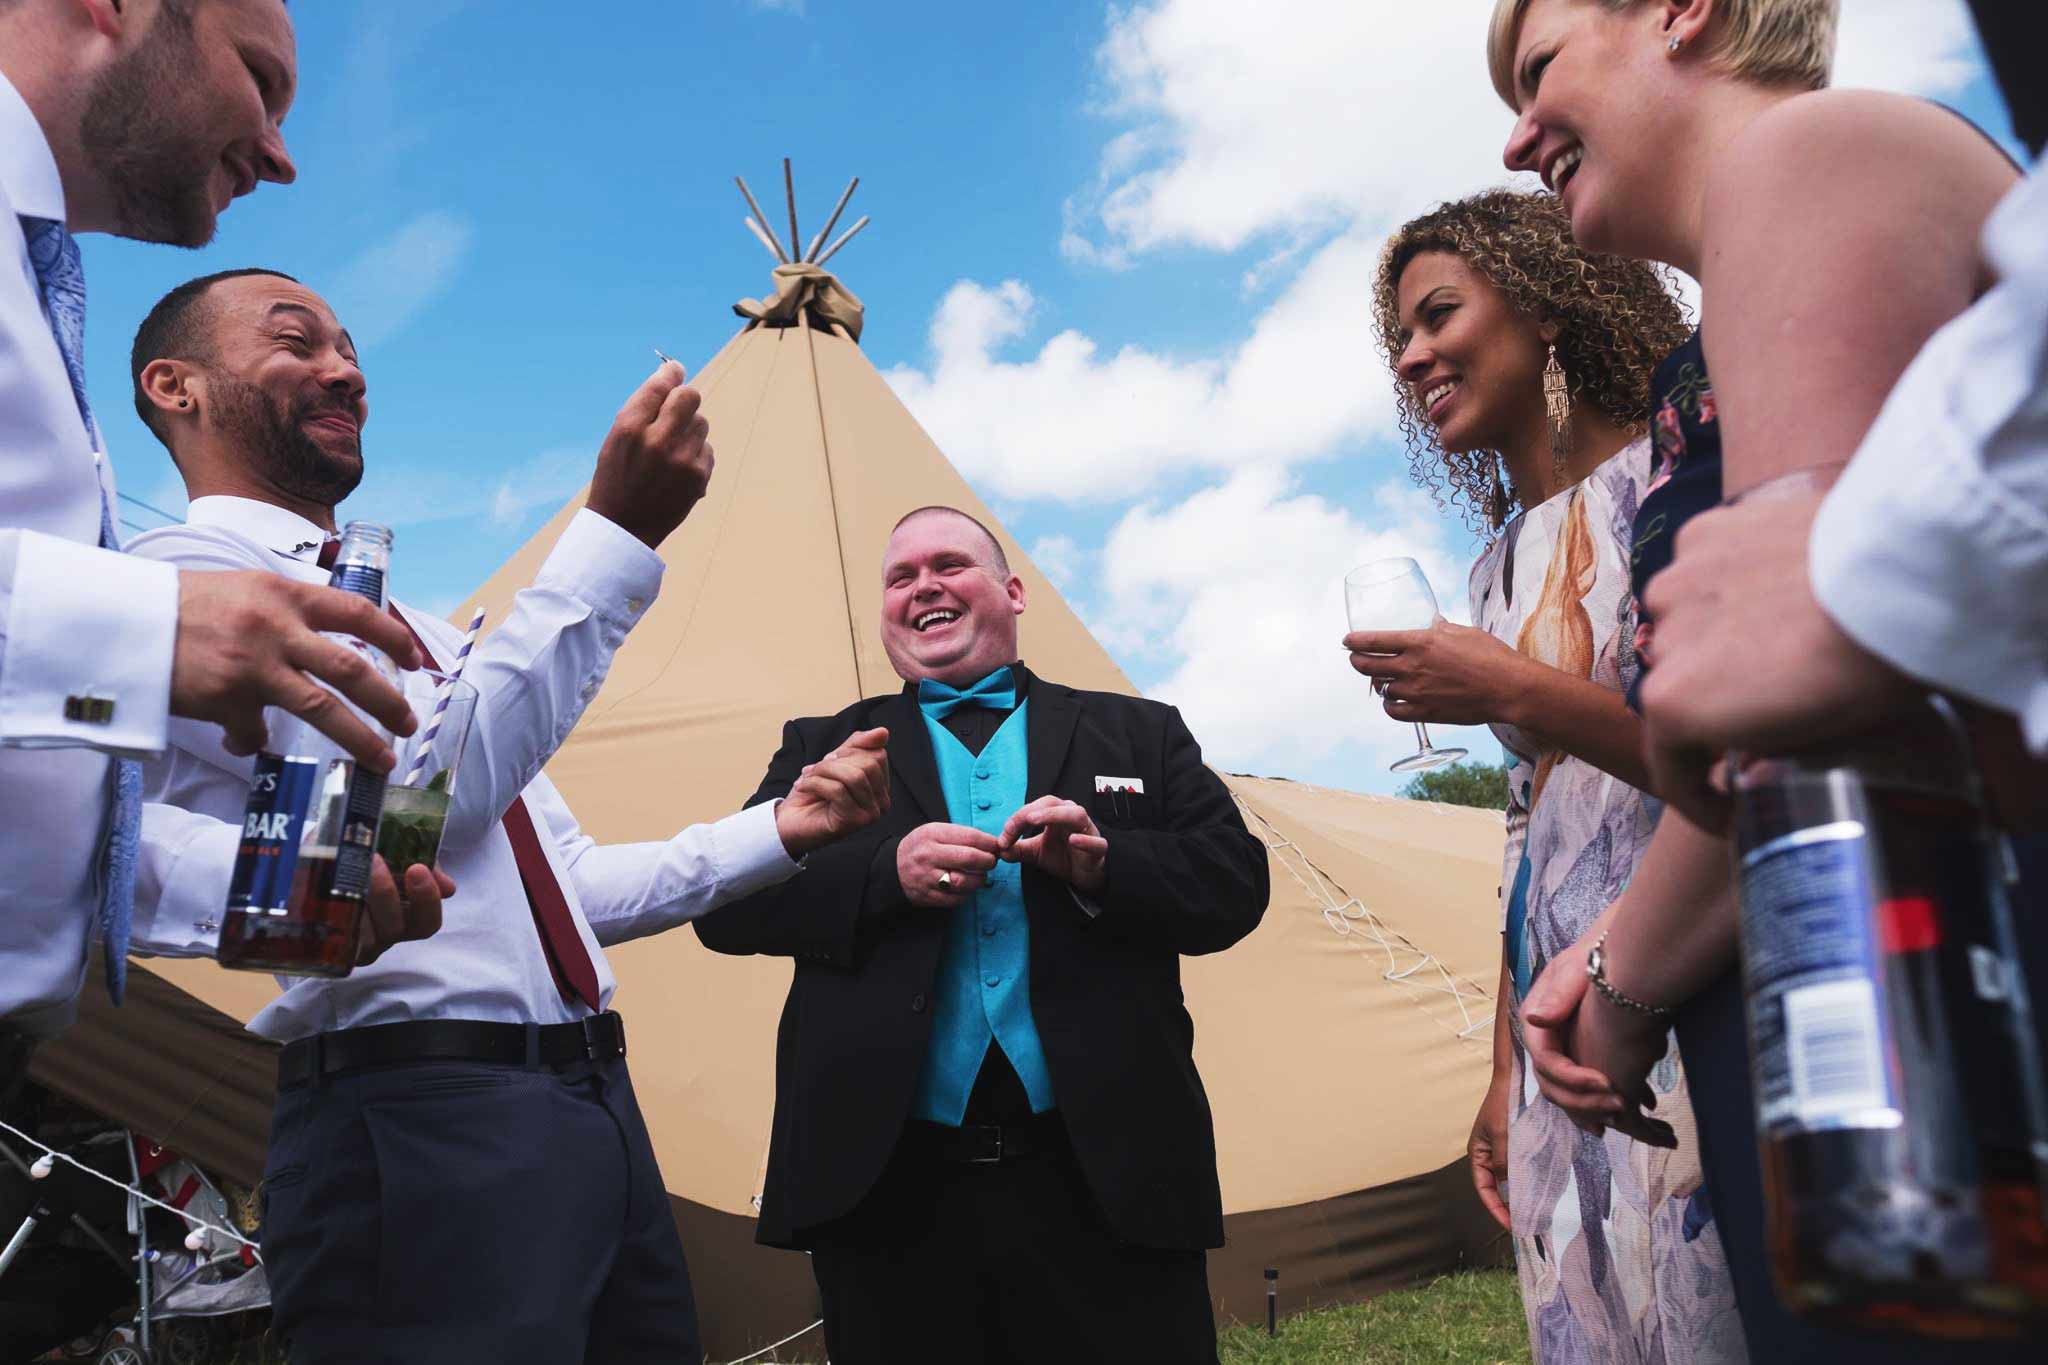 Derby wedding magician Paul Grundle performing close up magic to guests at a wedding